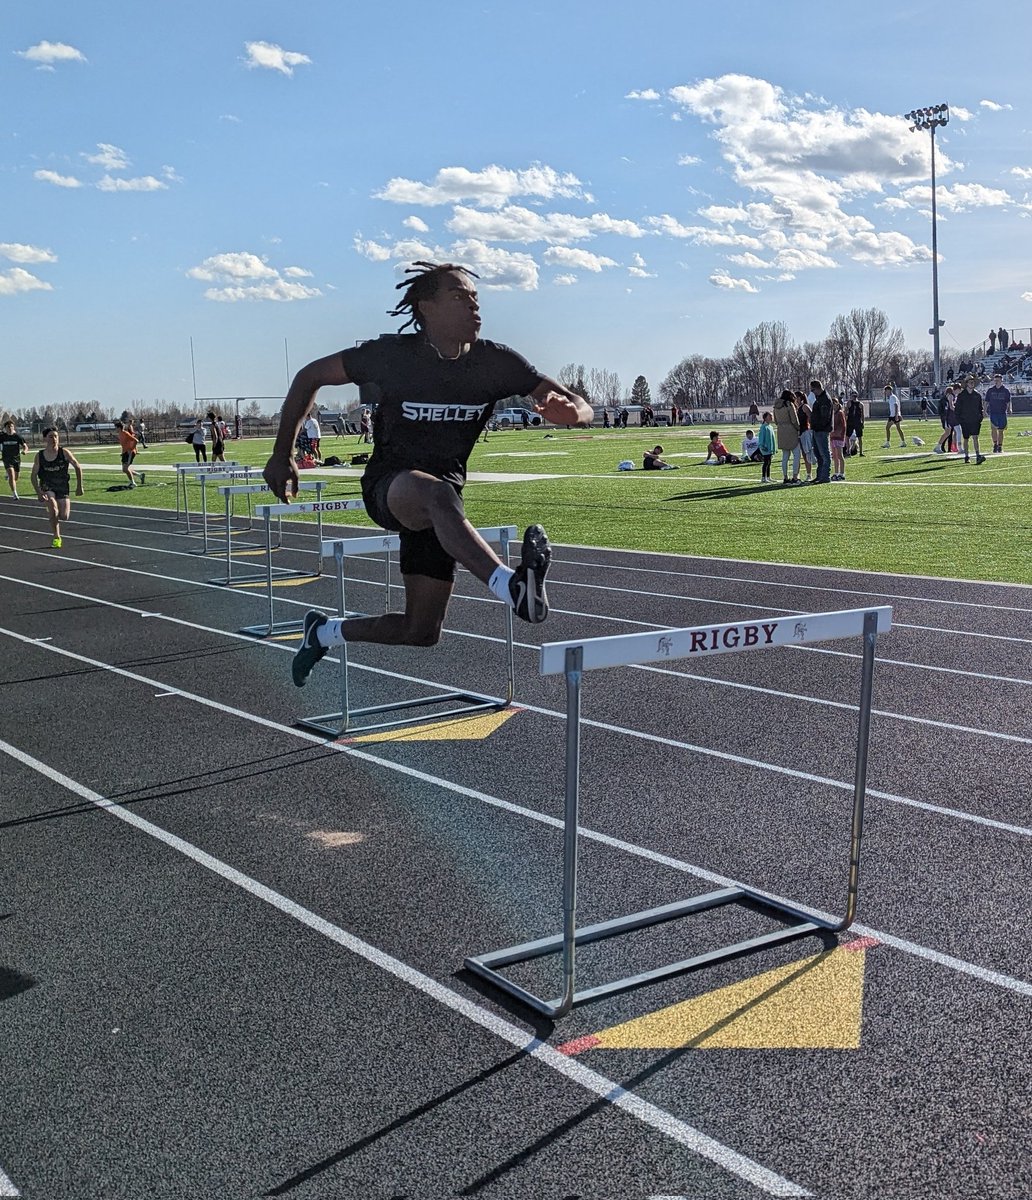 Great job by everyone that went to the JV meet at Rigby yesterday! And a special shout-out to Brett who won both hurdle events in his first track meet ever! #alwaysagreatdaytobearusset #shelleytrack #feedthecats #youwishyouwerearusset